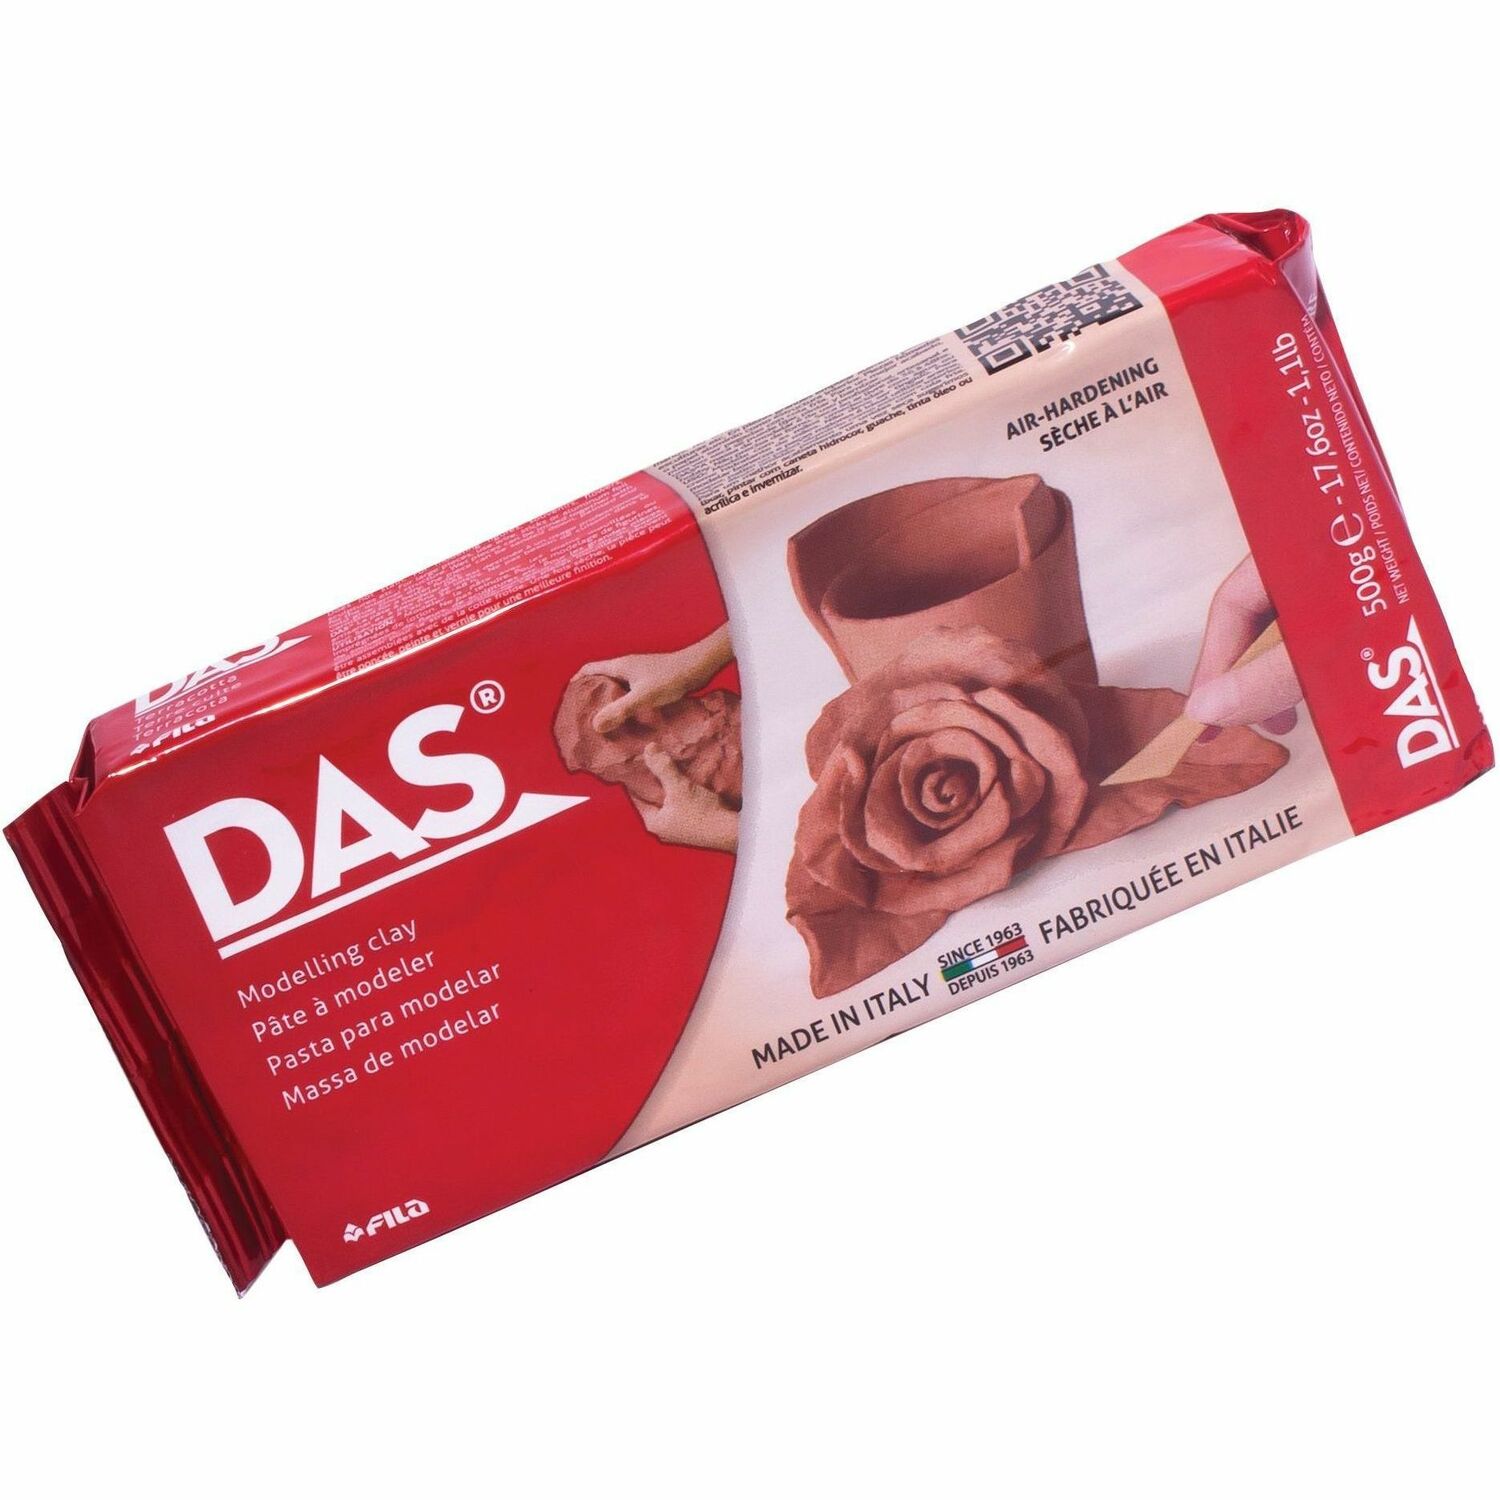 Das Air Hardening Modeling Clay